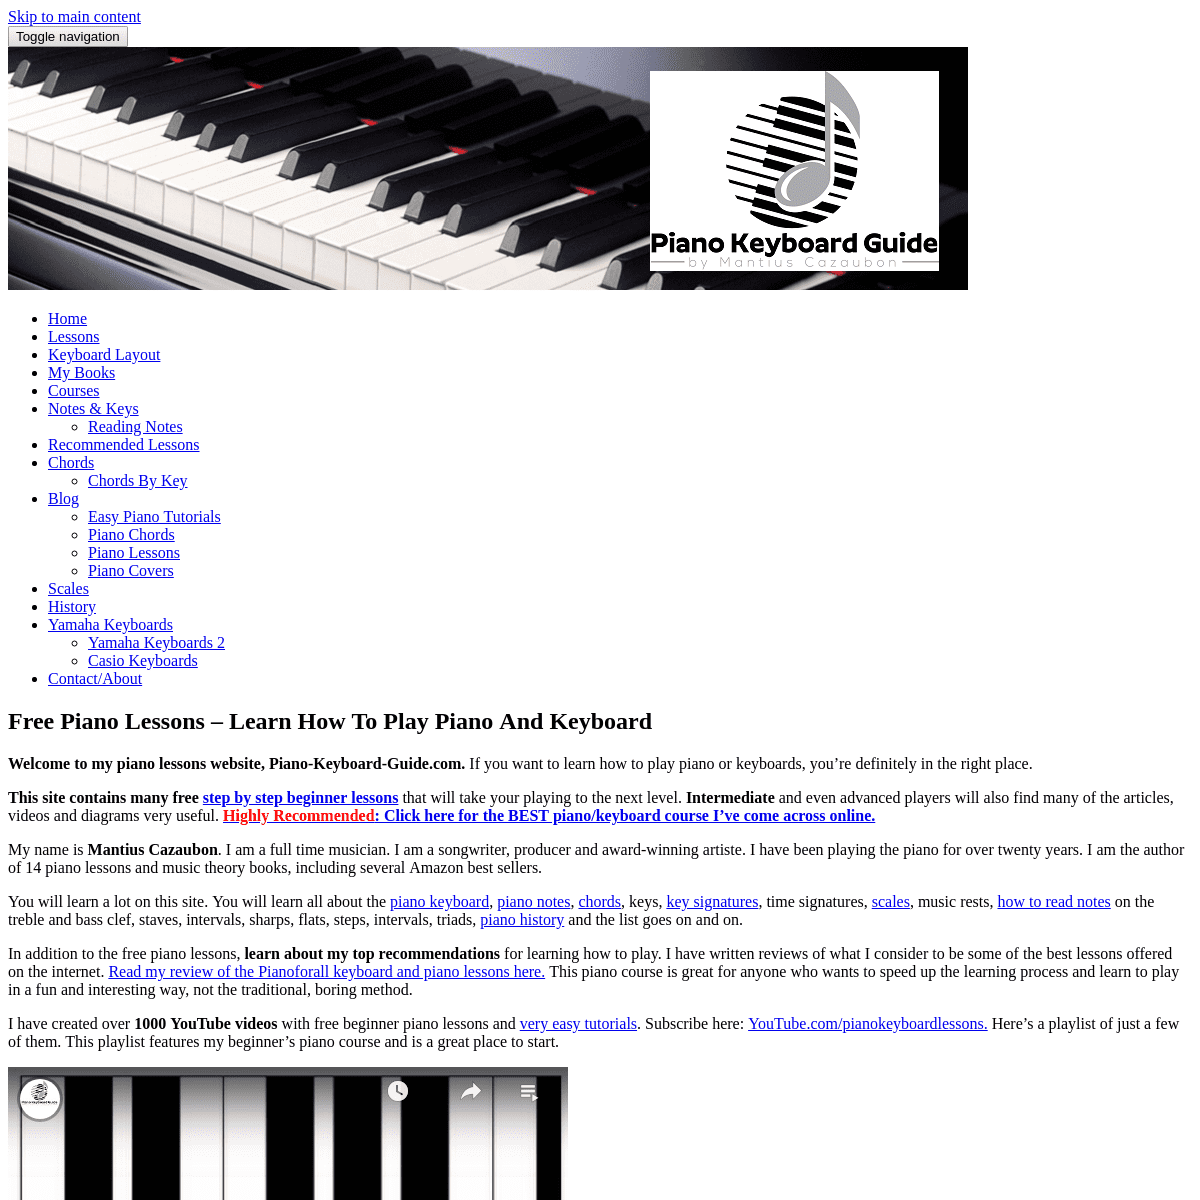 Free Piano Lessons – Learn How To Play Piano And Keyboard